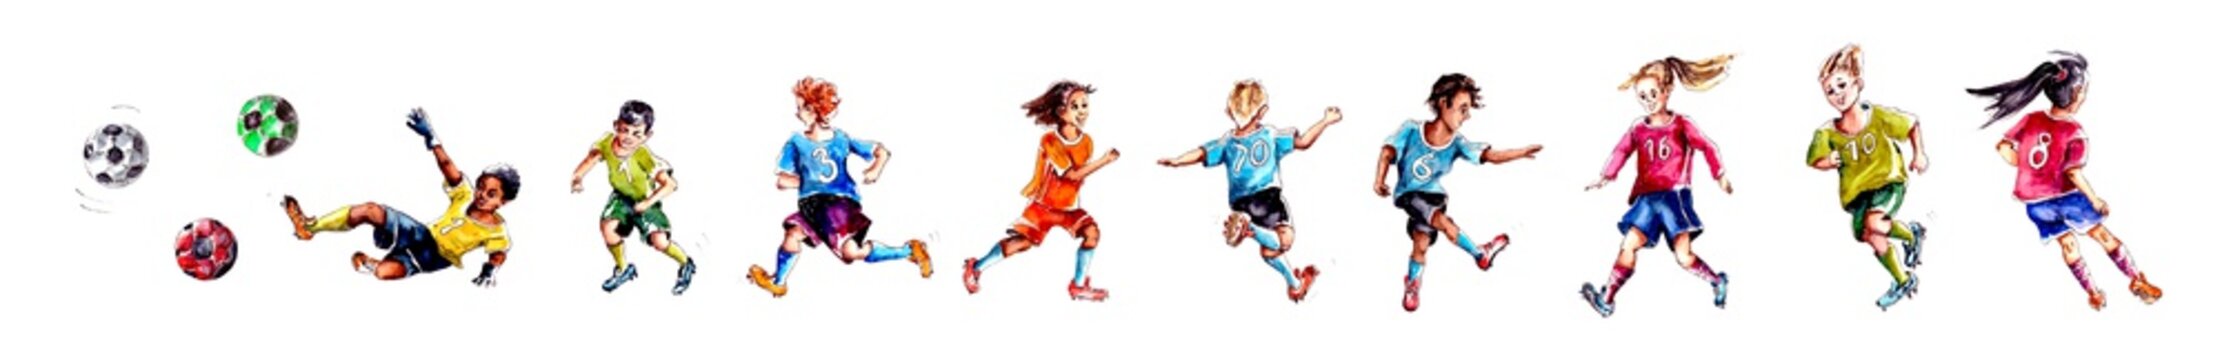 watercolor illustration collection of children playing football isolated on a white background